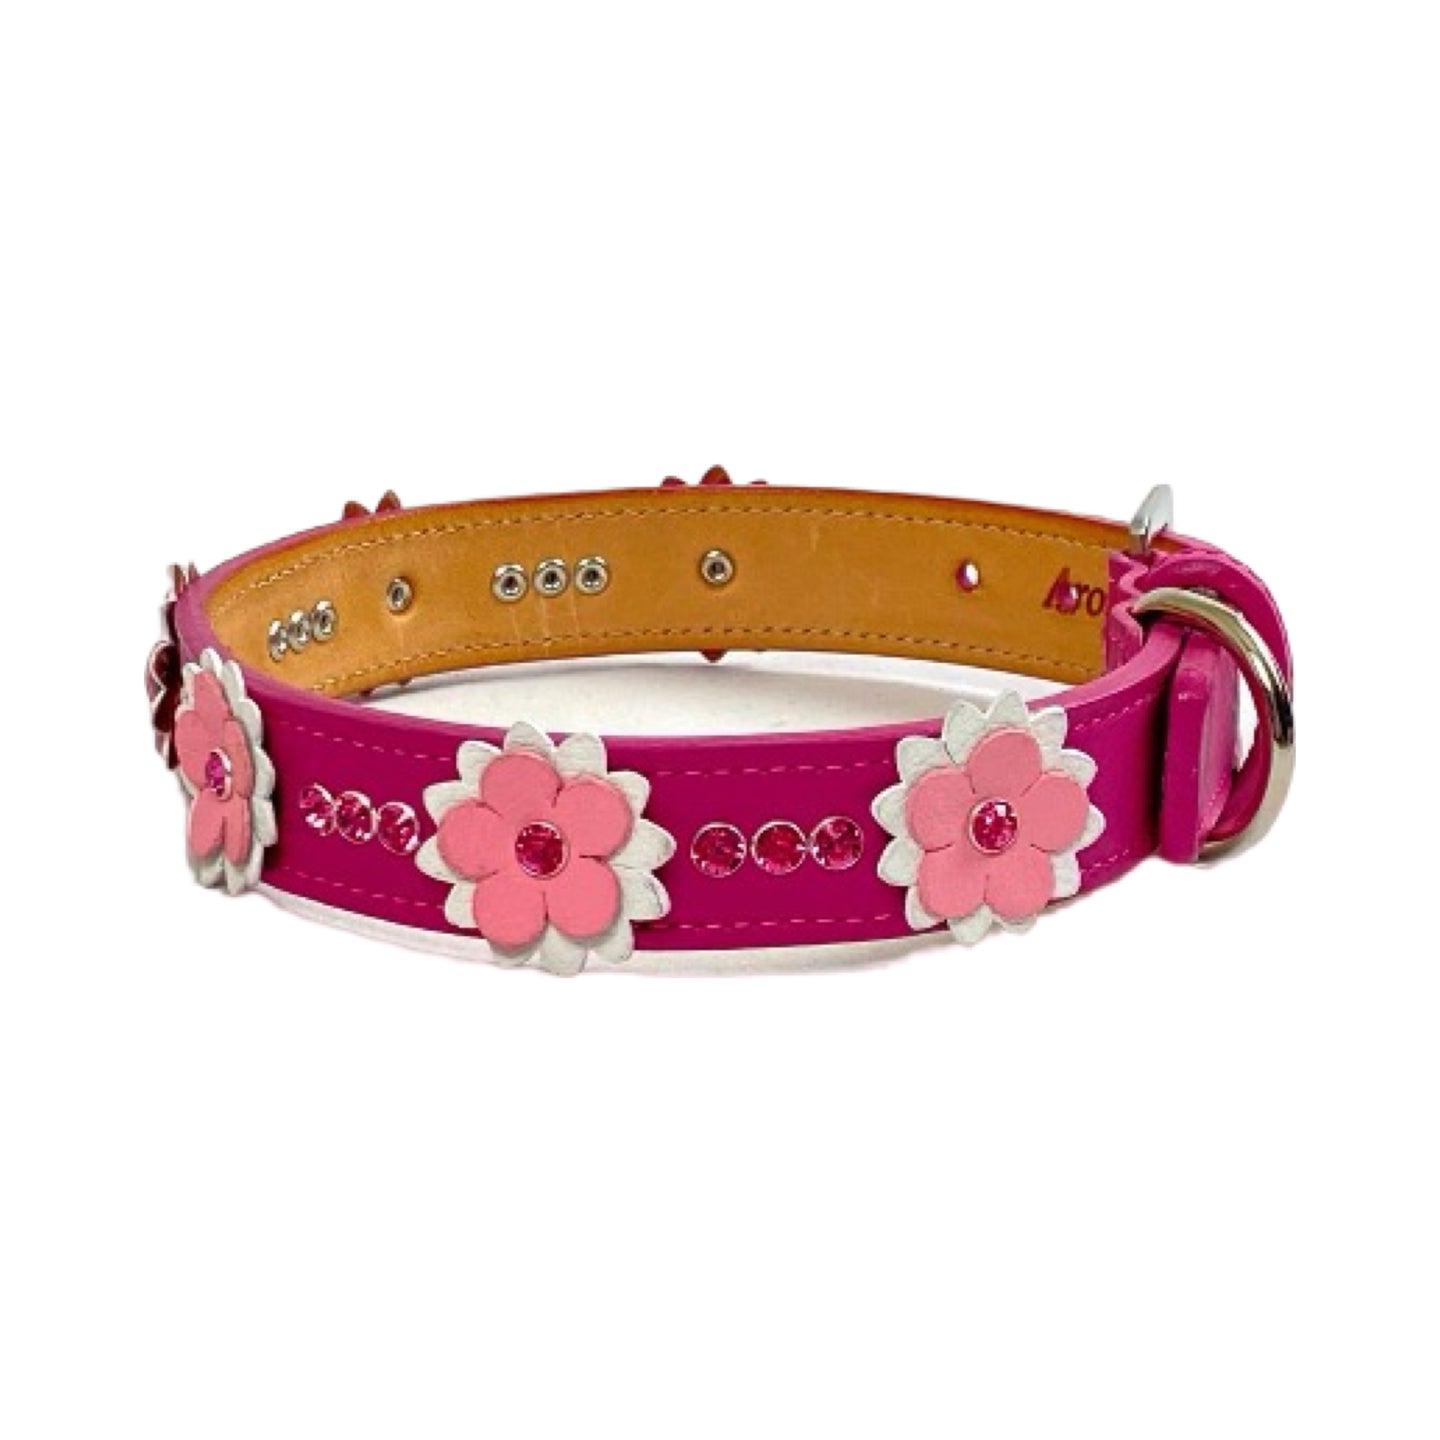 Rumi Flower Leather Dog Collar with 3 Crystals between Flower